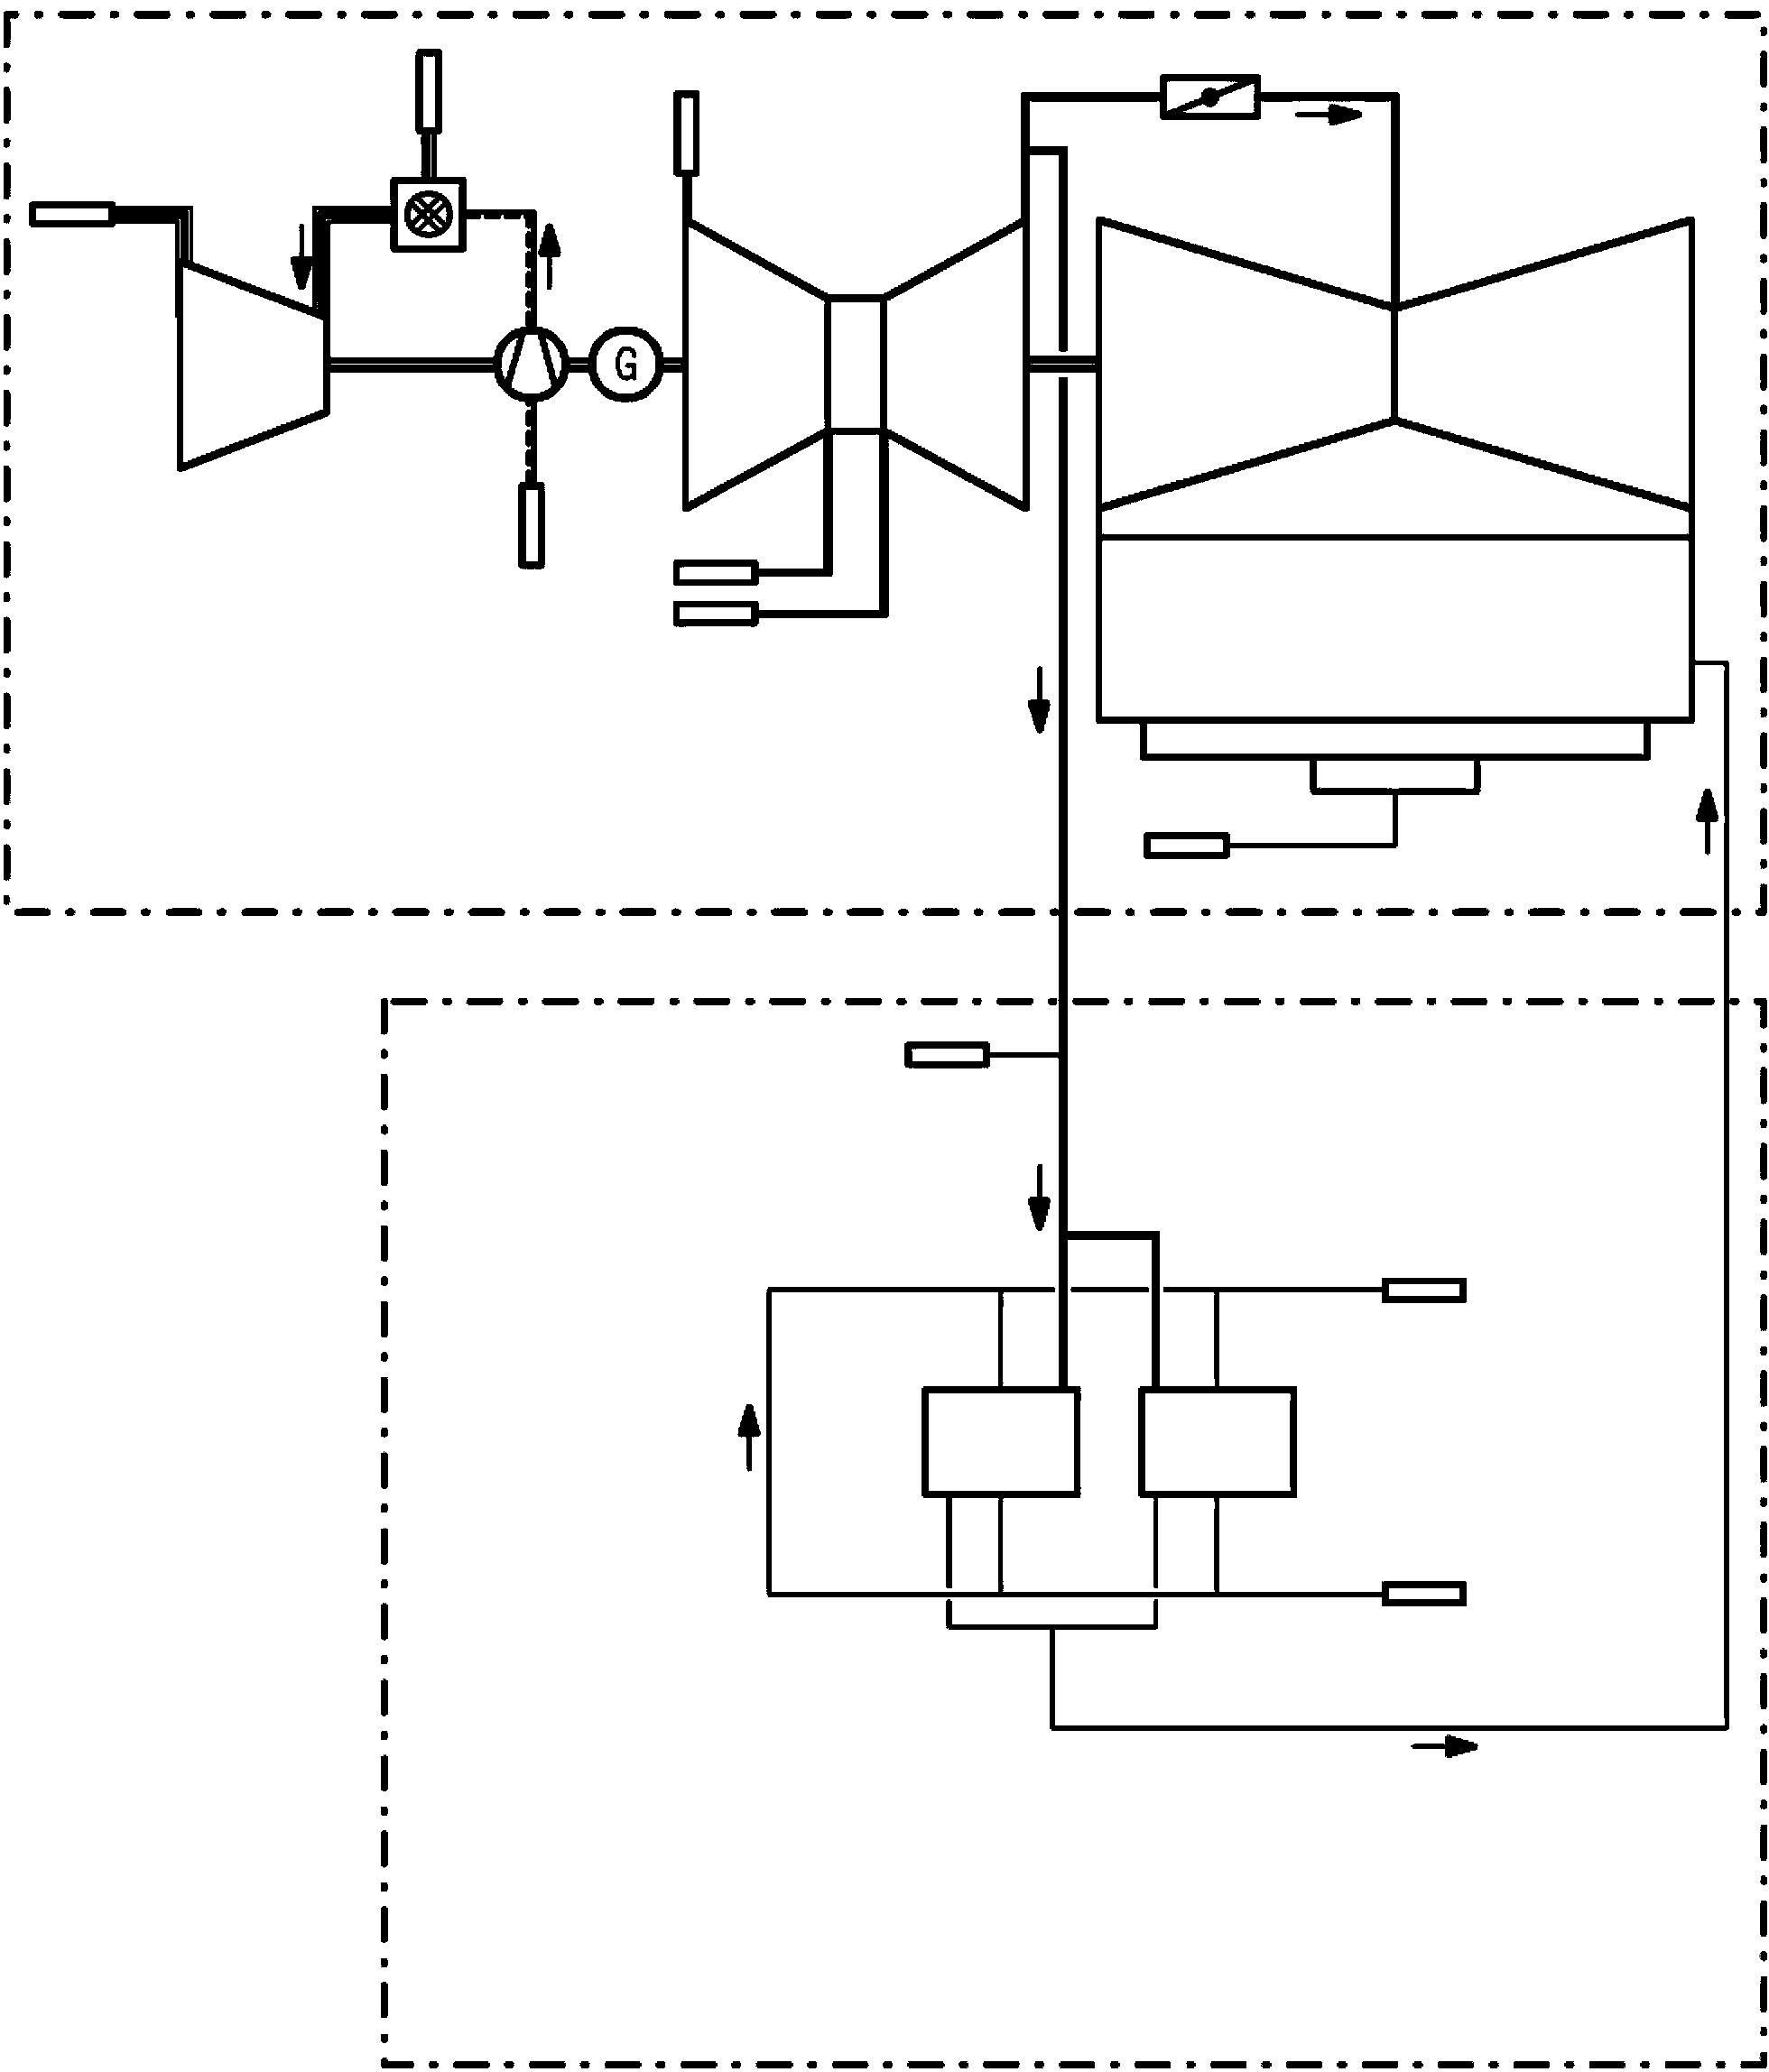 Retrofitting a heating steam extraction facility in a fossil-fired power plant